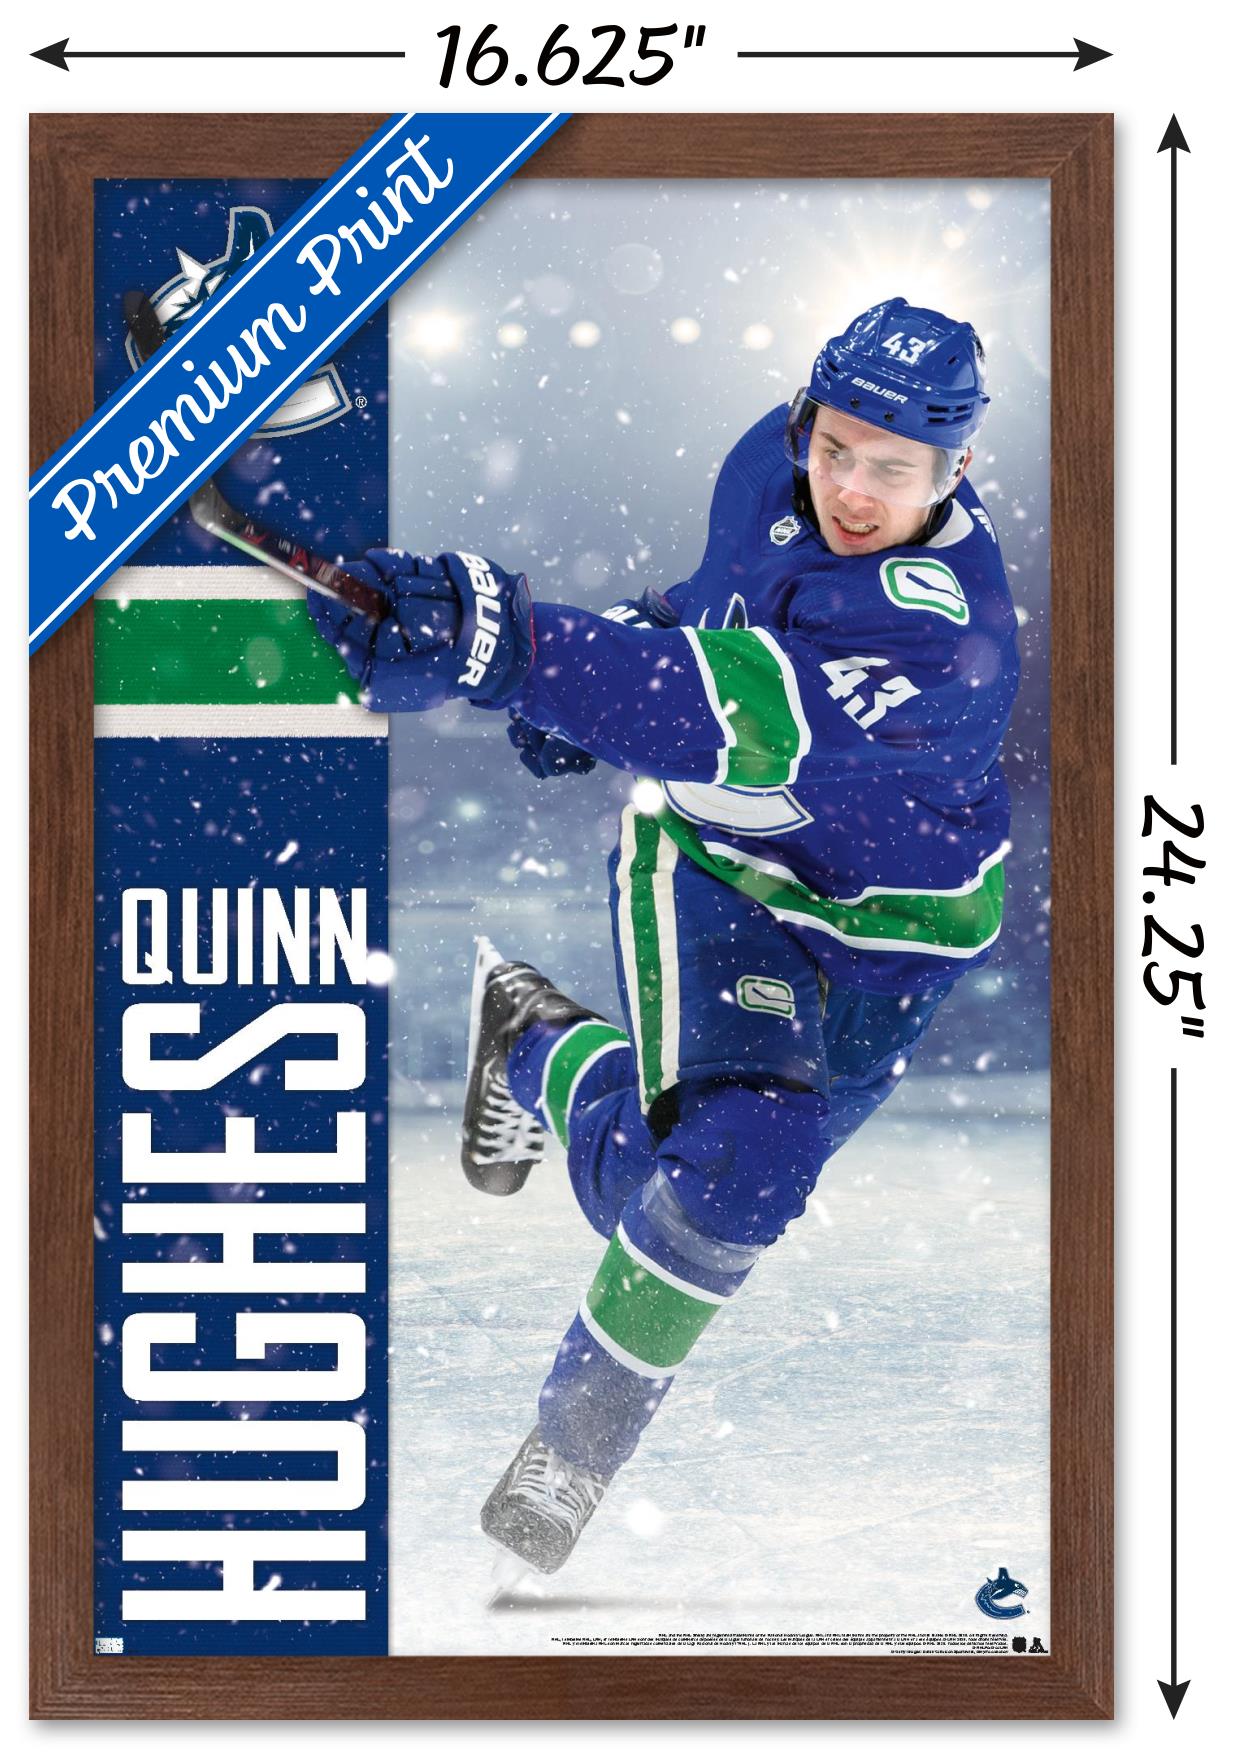 NHL Vancouver Canucks - Quinn Hughes 20 Wall Poster, 14.725" x 22.375", Framed - image 3 of 5